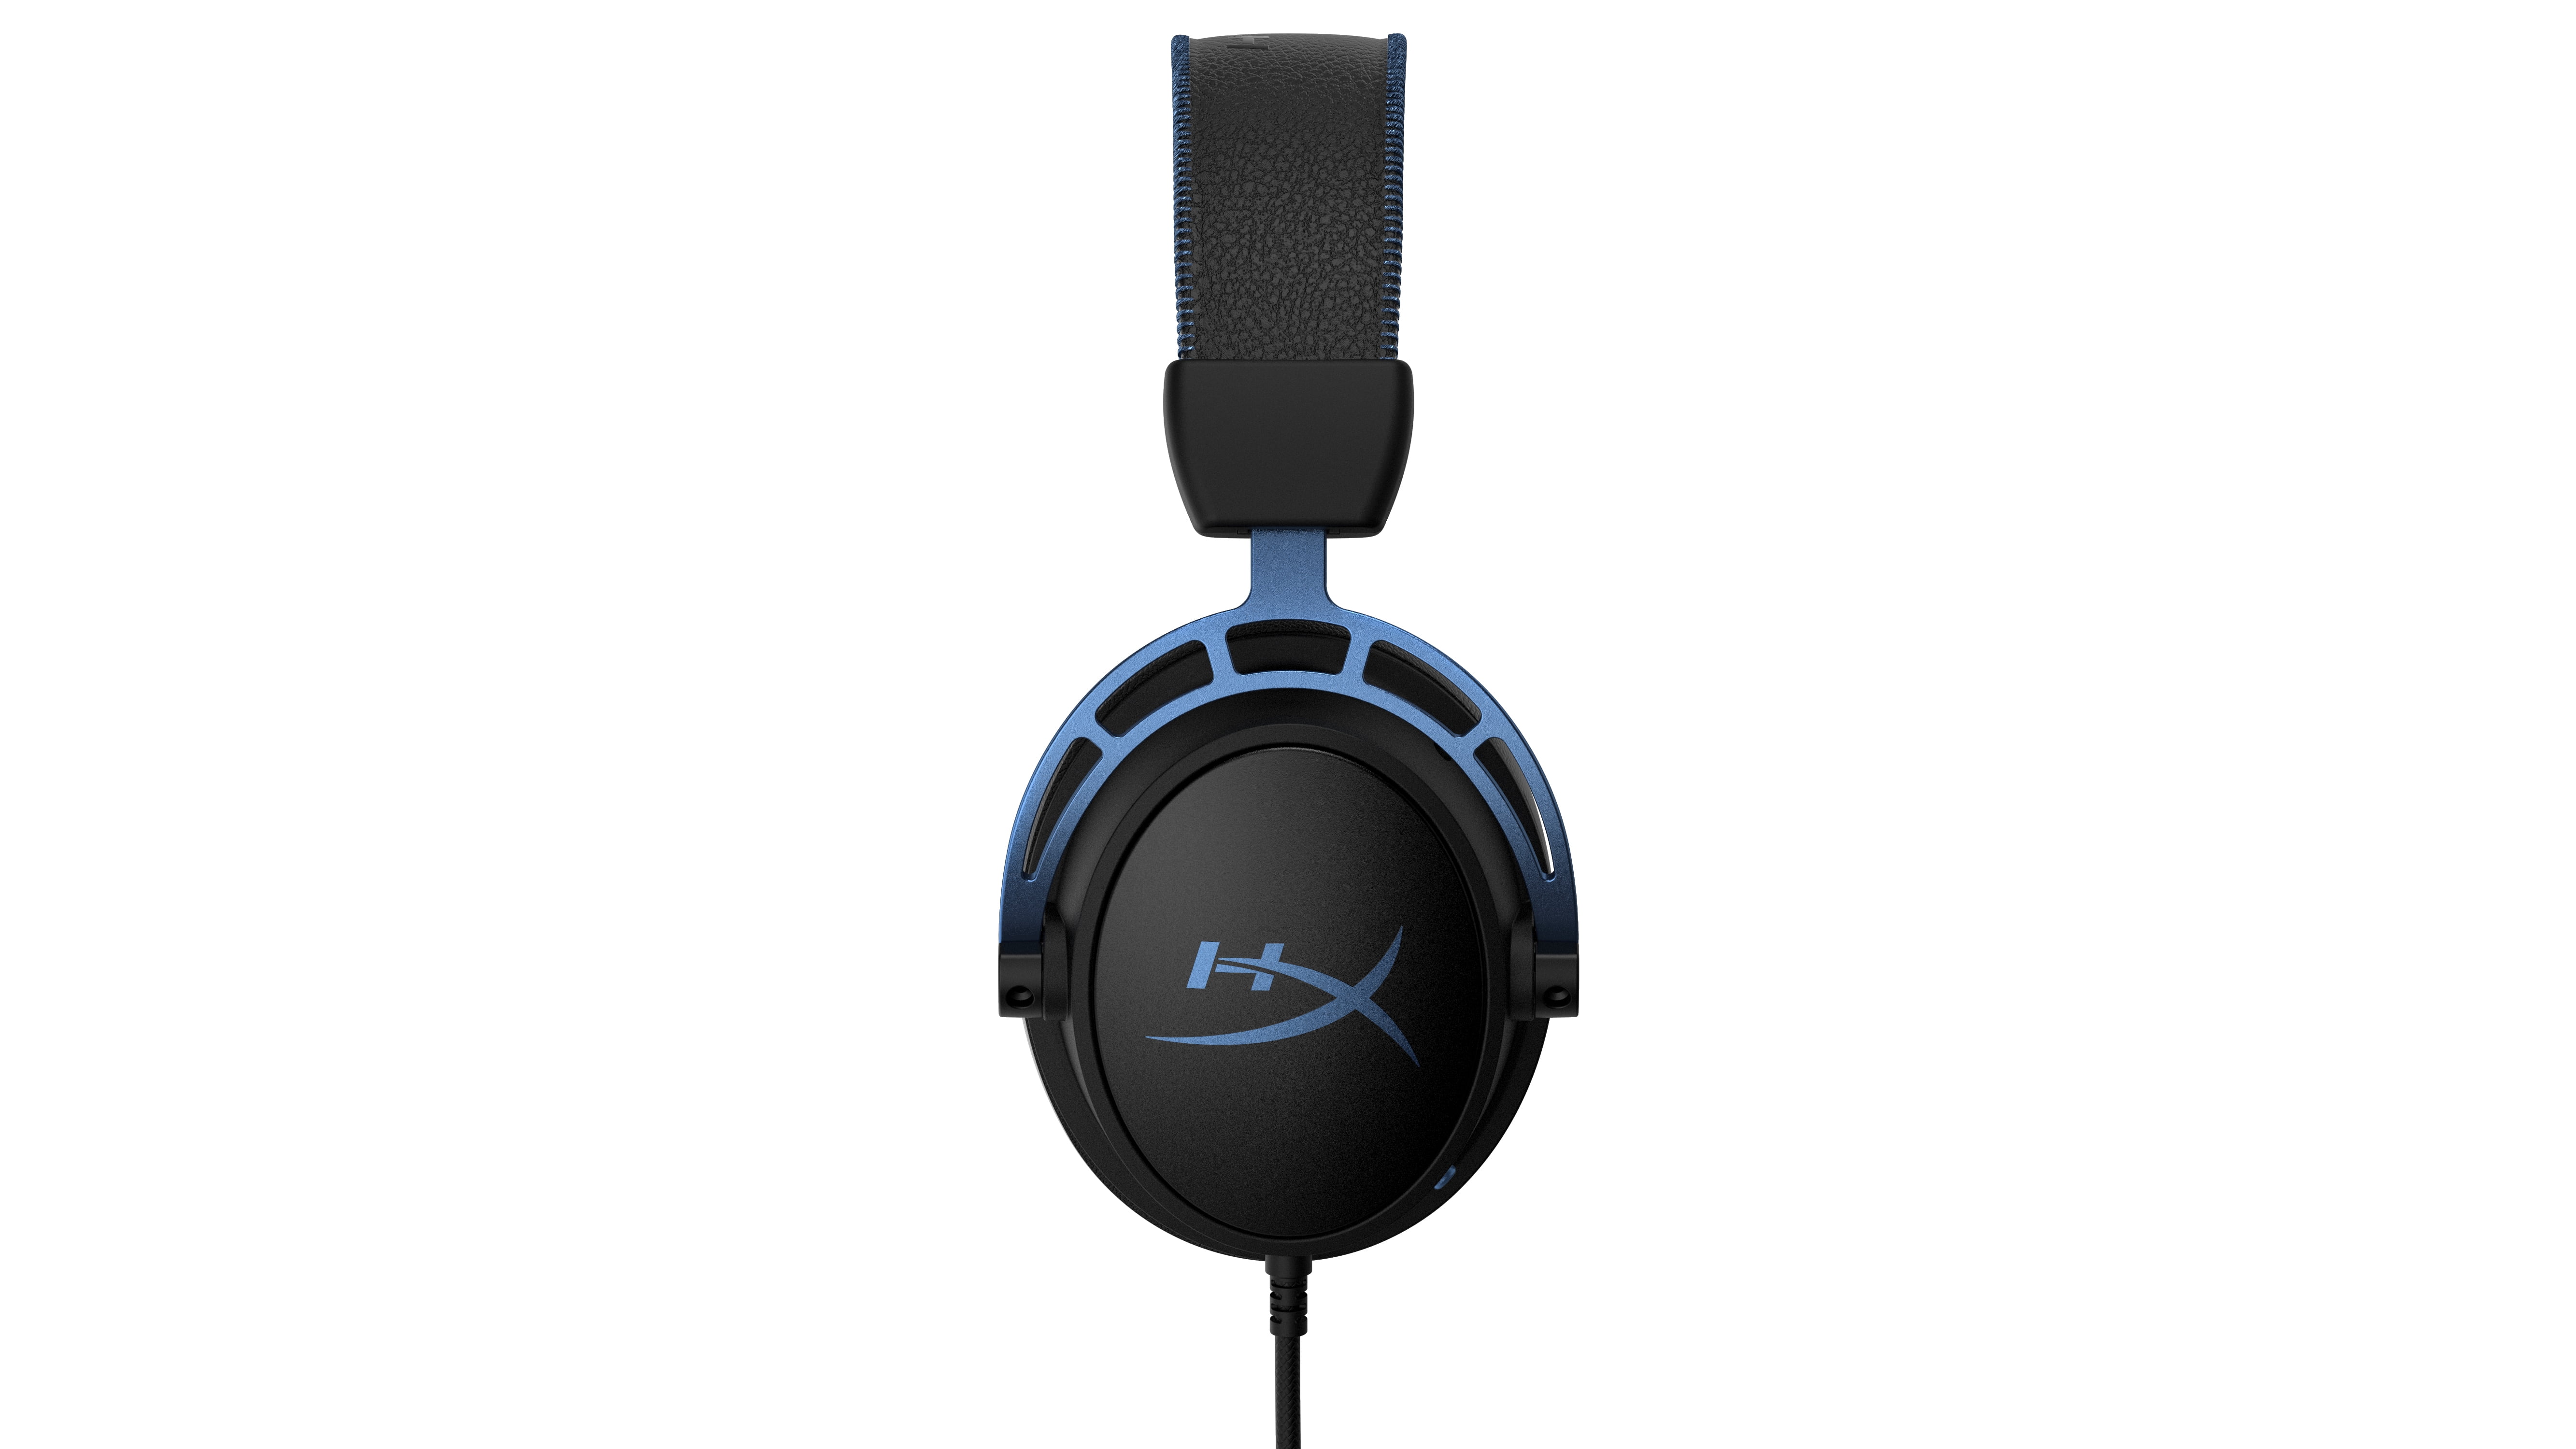 trui Ontslag Boer HyperX Cloud Alpha S - Gaming Headset, for PC, 7.1 Surround Sound,  Adjustable Bass, Dual Chamber Drivers, Chat Mixer, Breathable Leatherette,  Memory Foam, and Noise Cancelling Microphone - Walmart.com